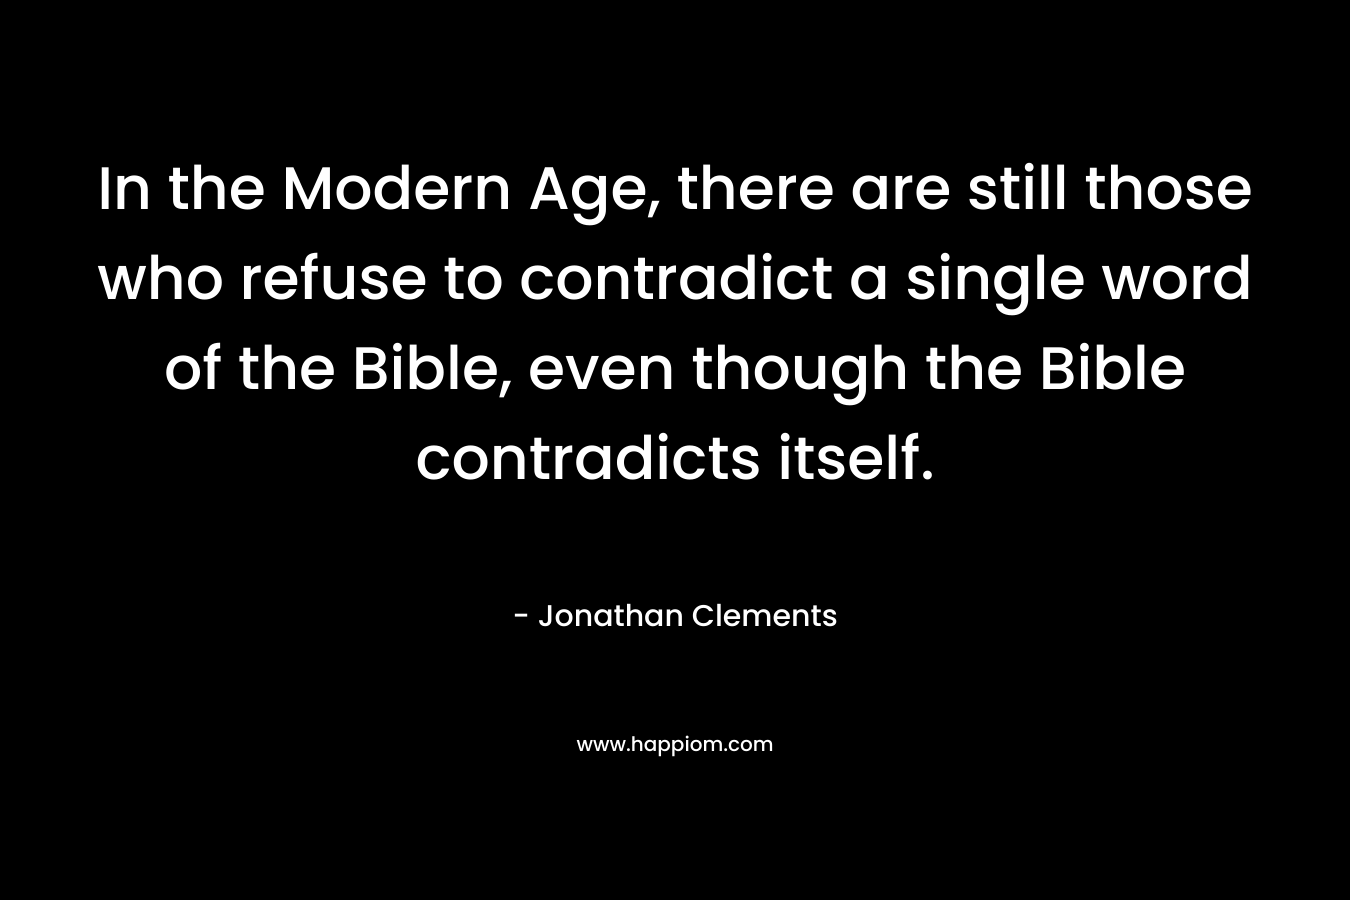 In the Modern Age, there are still those who refuse to contradict a single word of the Bible, even though the Bible contradicts itself.